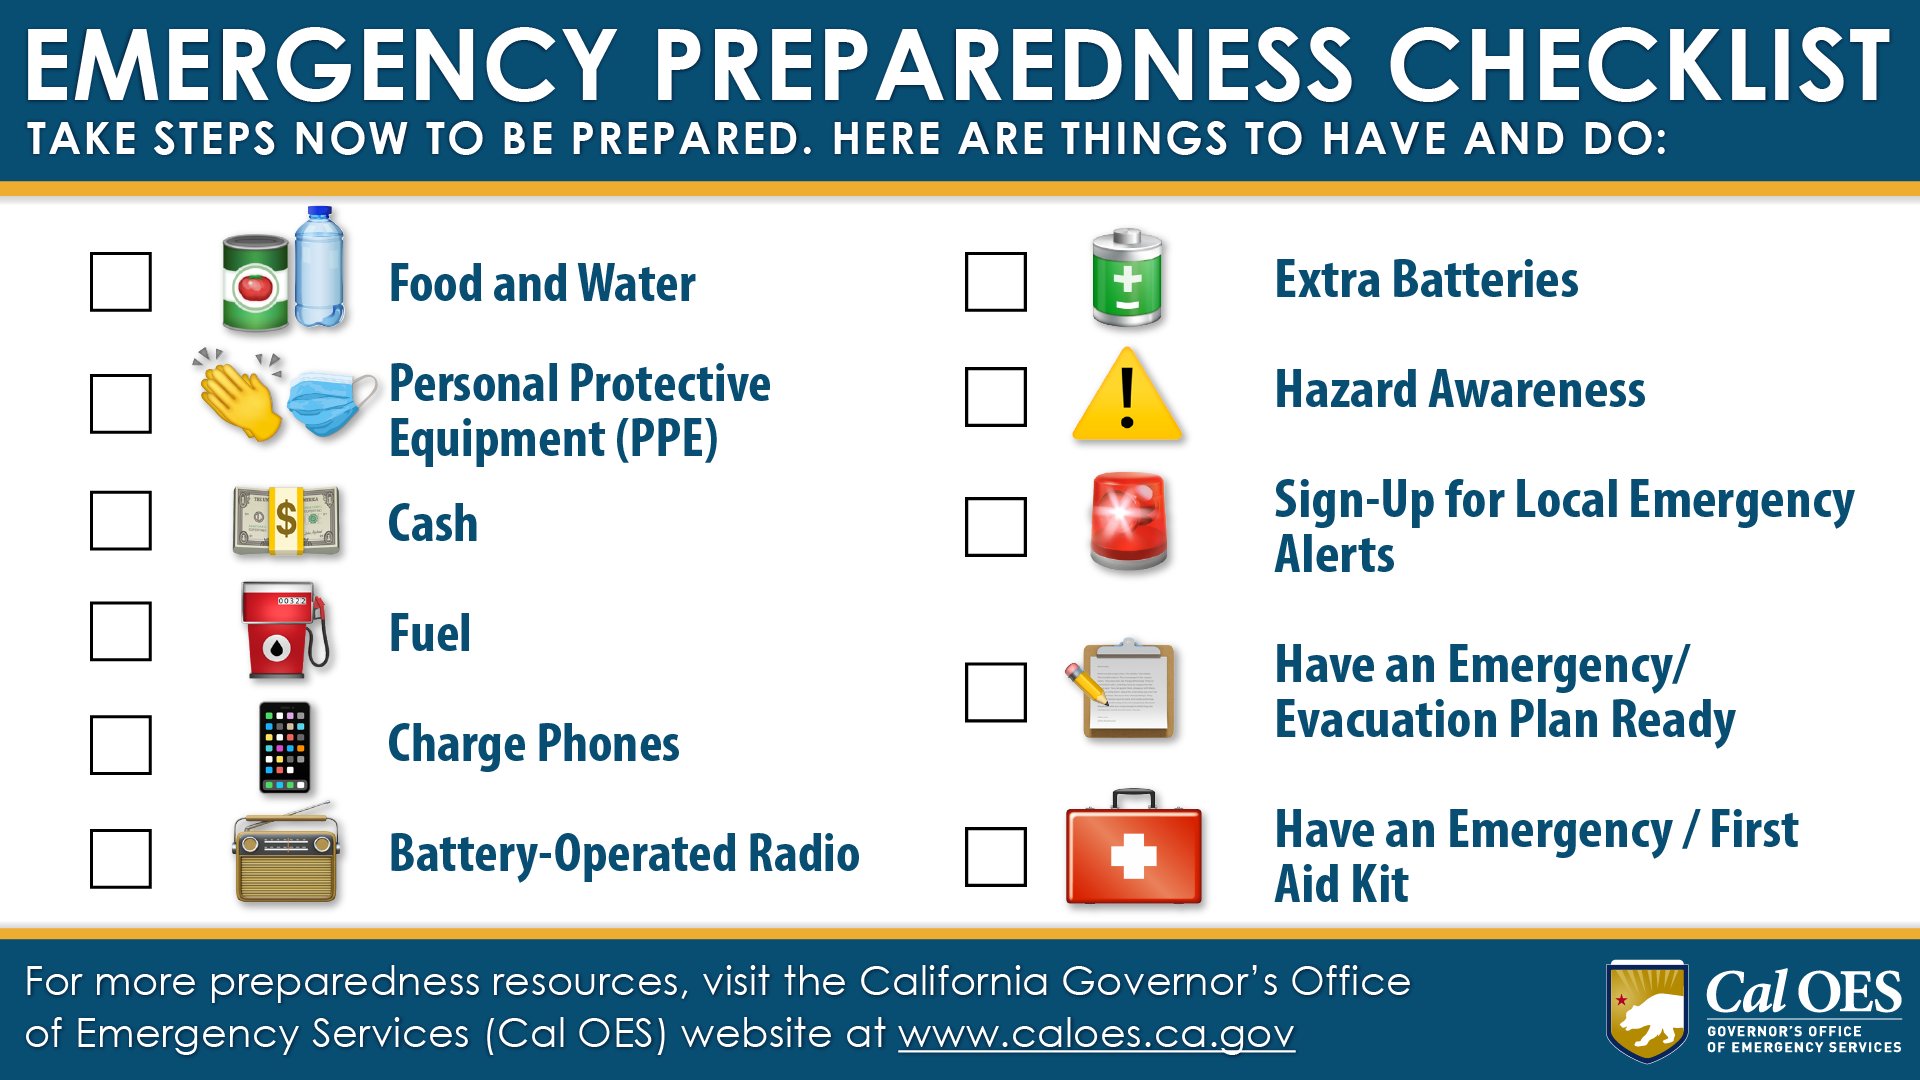 California Governor's Office of Emergency Services on X: Are you ready for  the next disaster? Always be prepared, whether for a wildfire, flood,  earthquake or any emergency. Stay alert and listen to